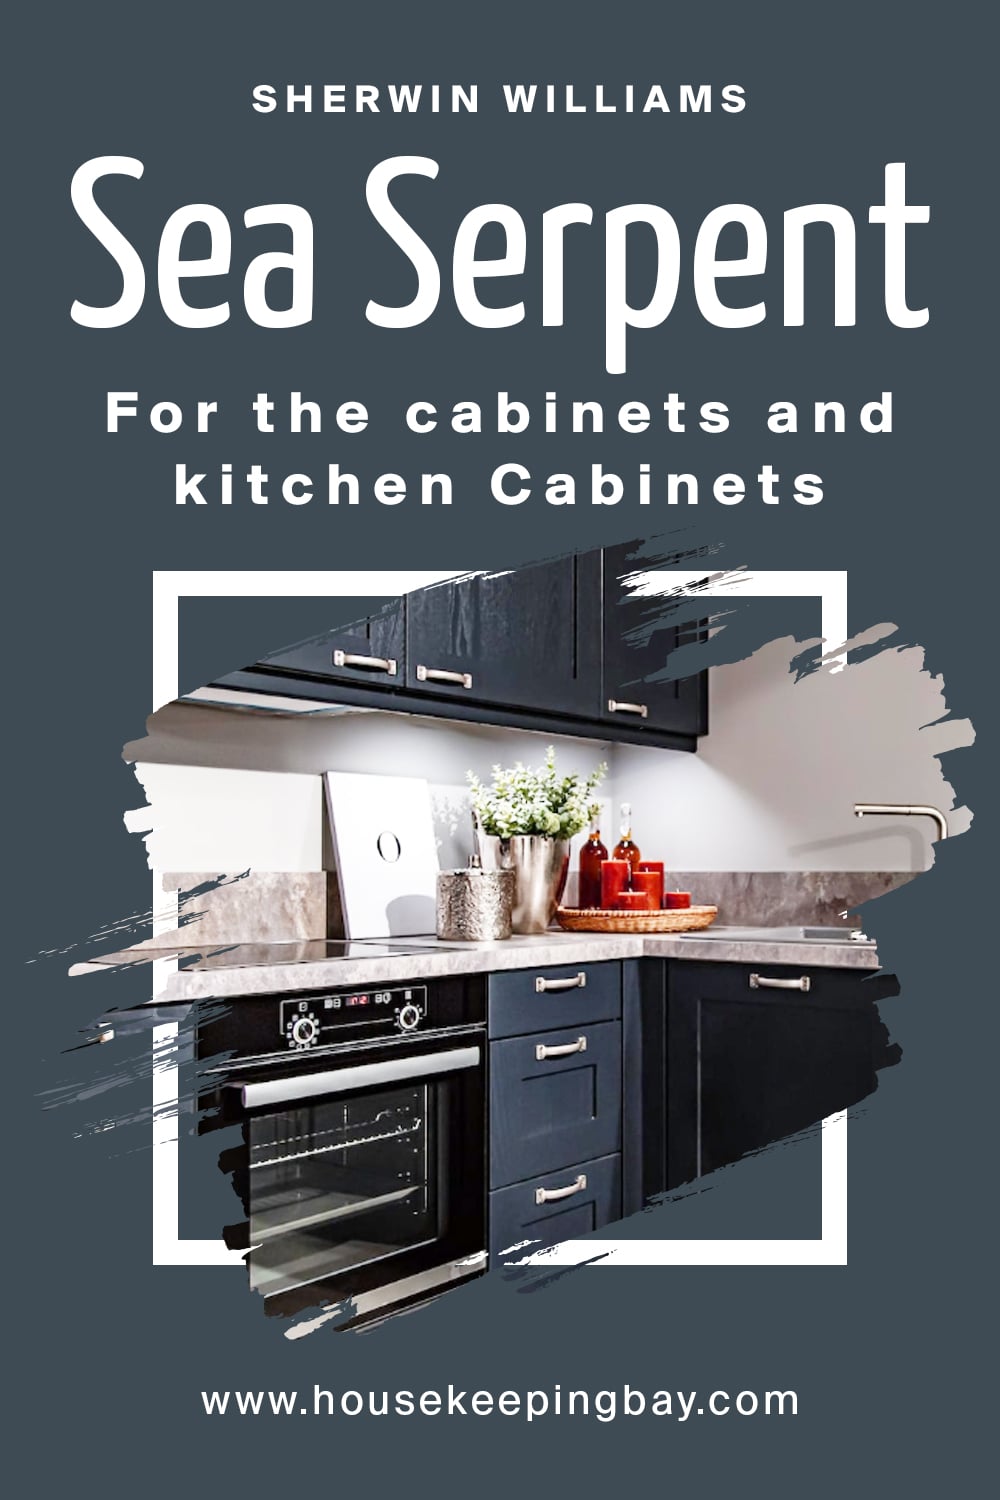 Sherwin Williams. Sea Serpent For the cabinets and kitchen Cabinets